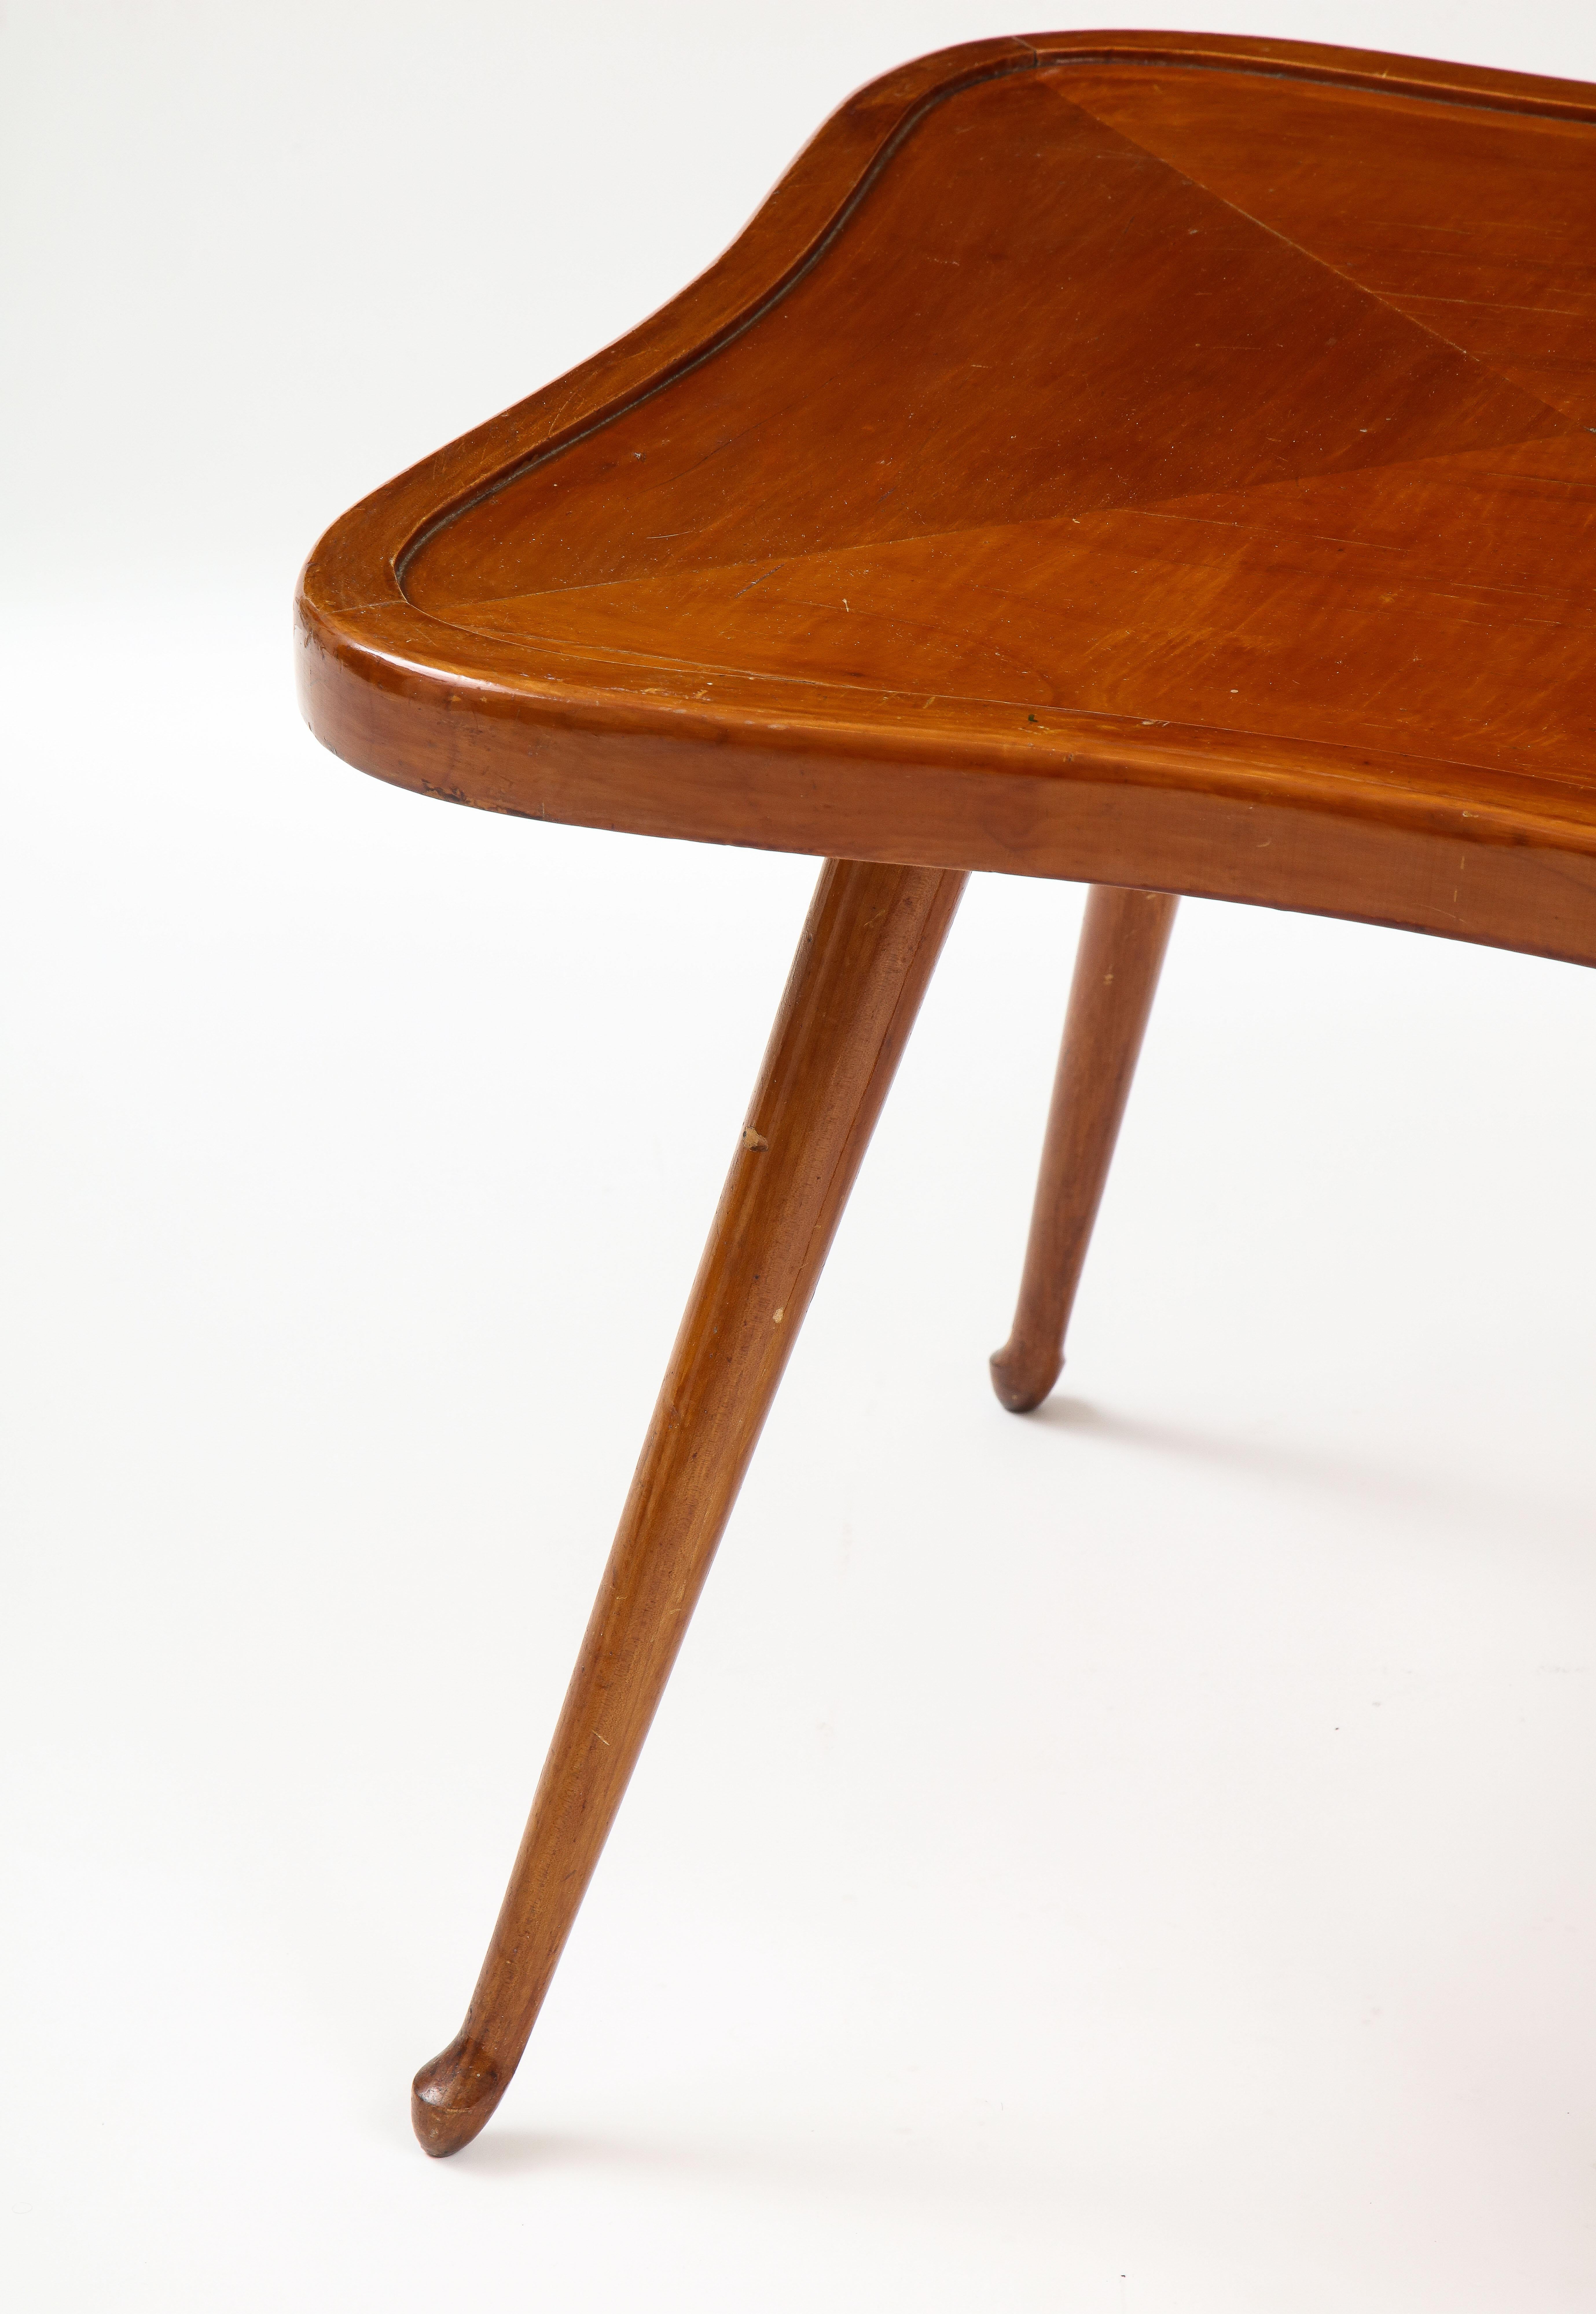 Paolo Buffa 'Attrib.' Occasional Clover Shaped Table, c. 1950-60 2